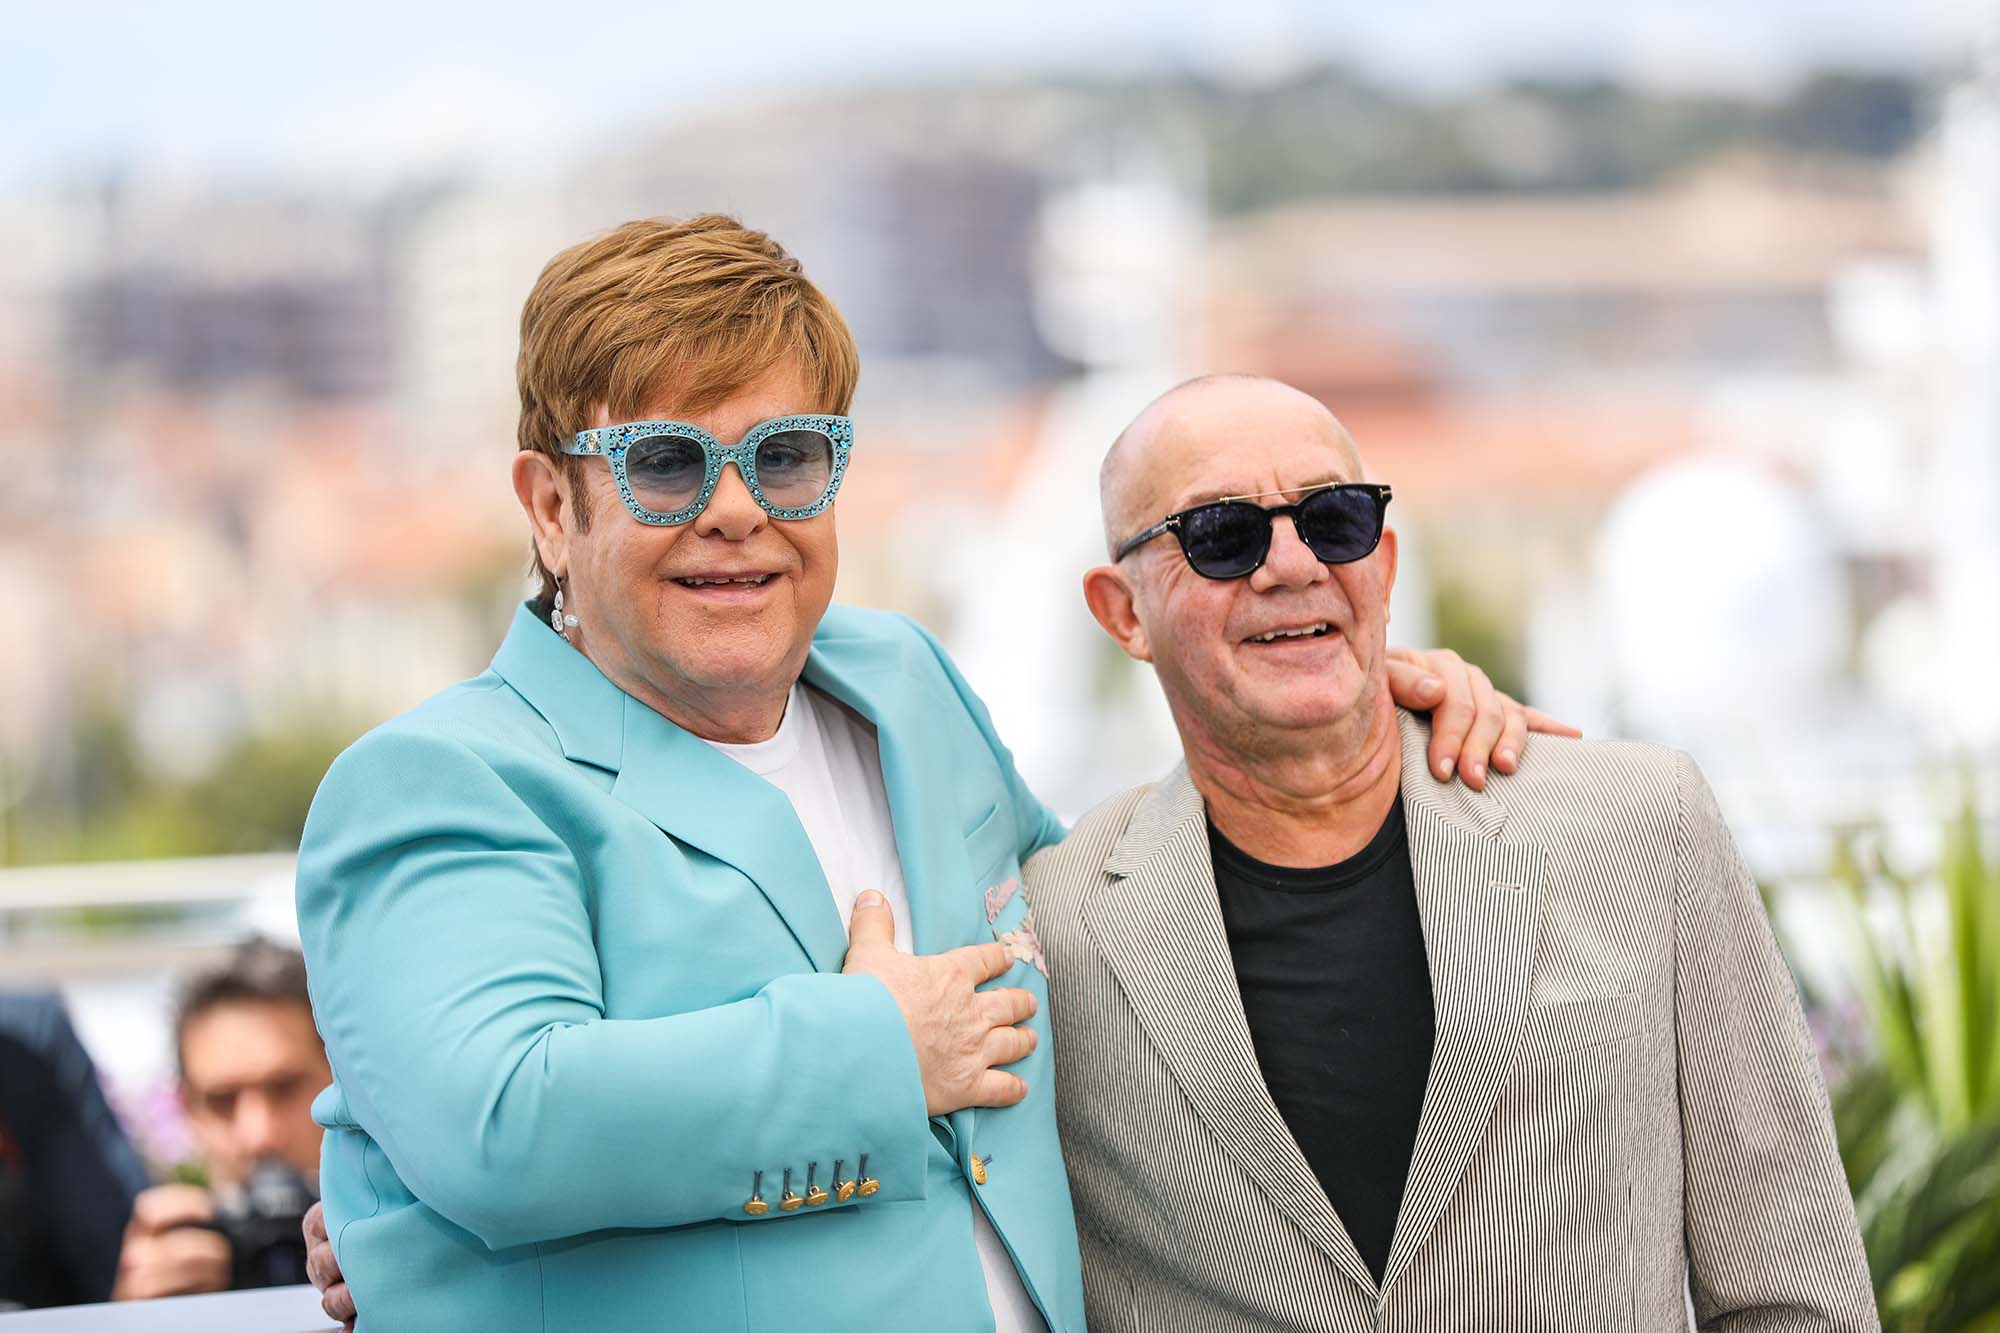 Sir Elton John and Bernie Taupin attend the photocall for 'Rocketman' in France, 2019.